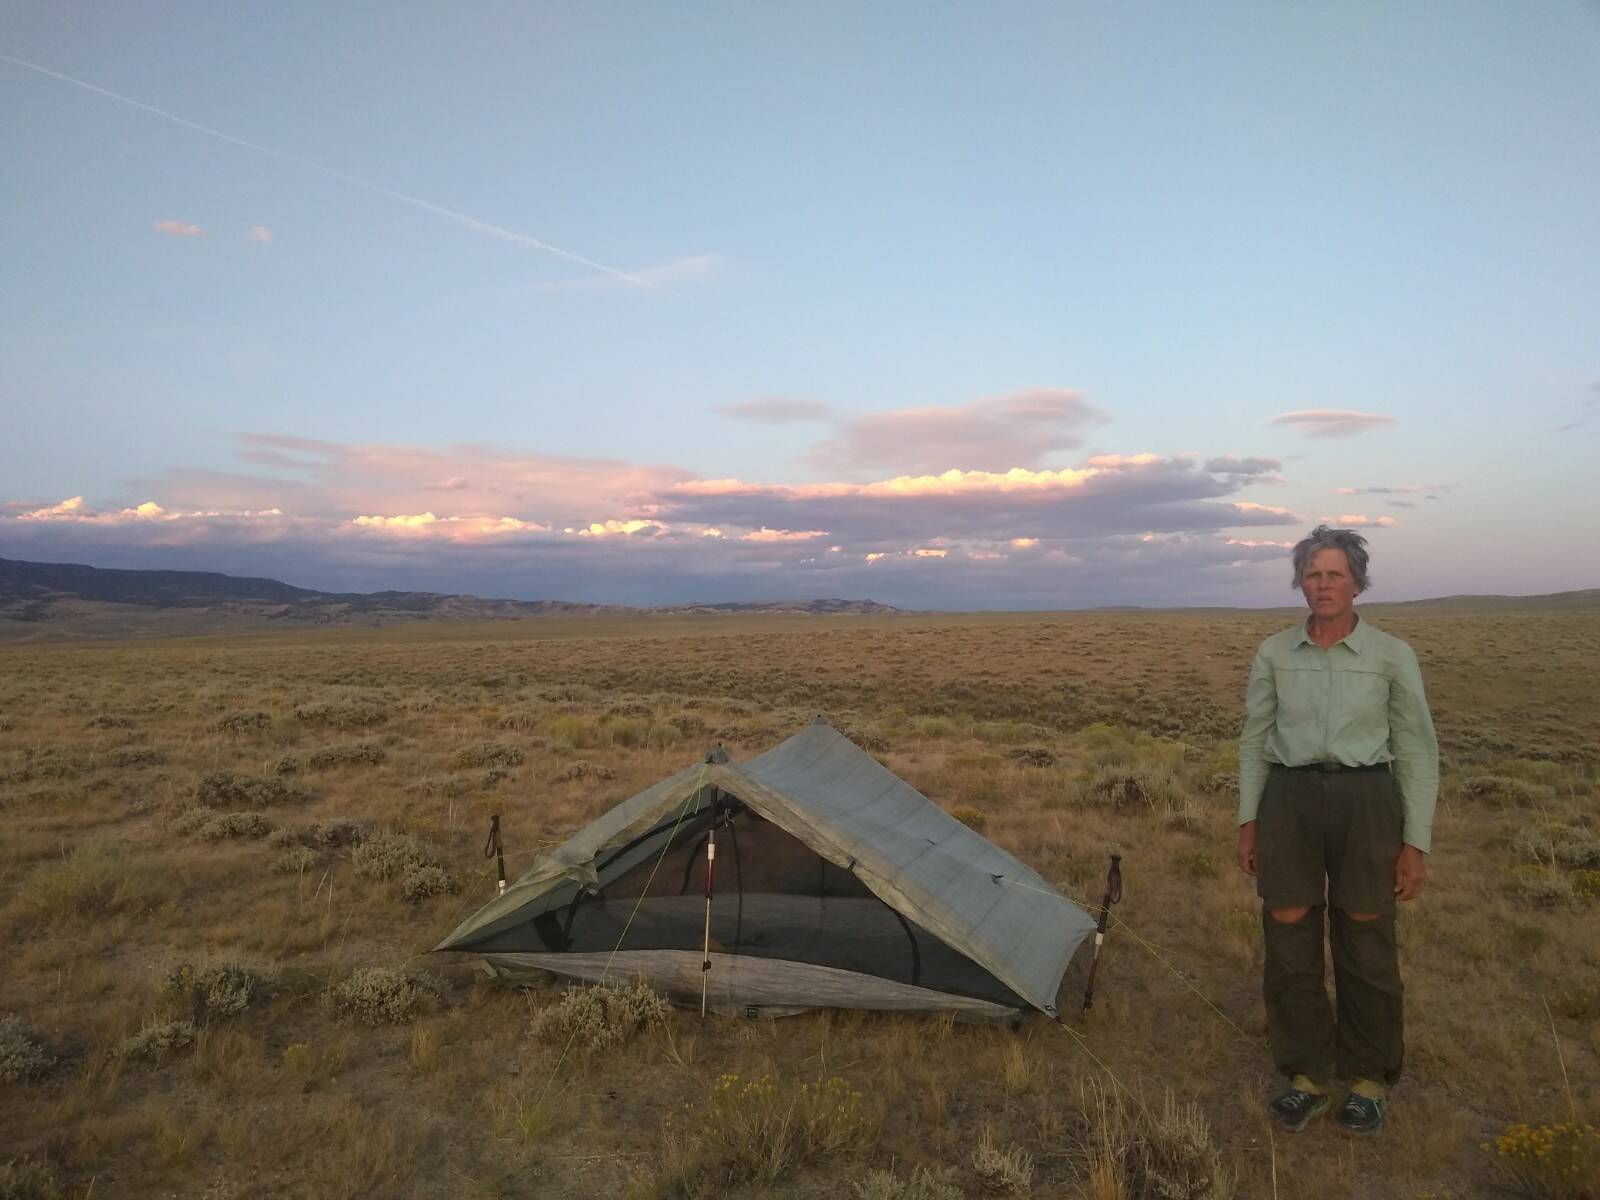 Contributed photo
Packing lightweight gear is of paramount importance. Mary Gropp shows off their primitive tent.